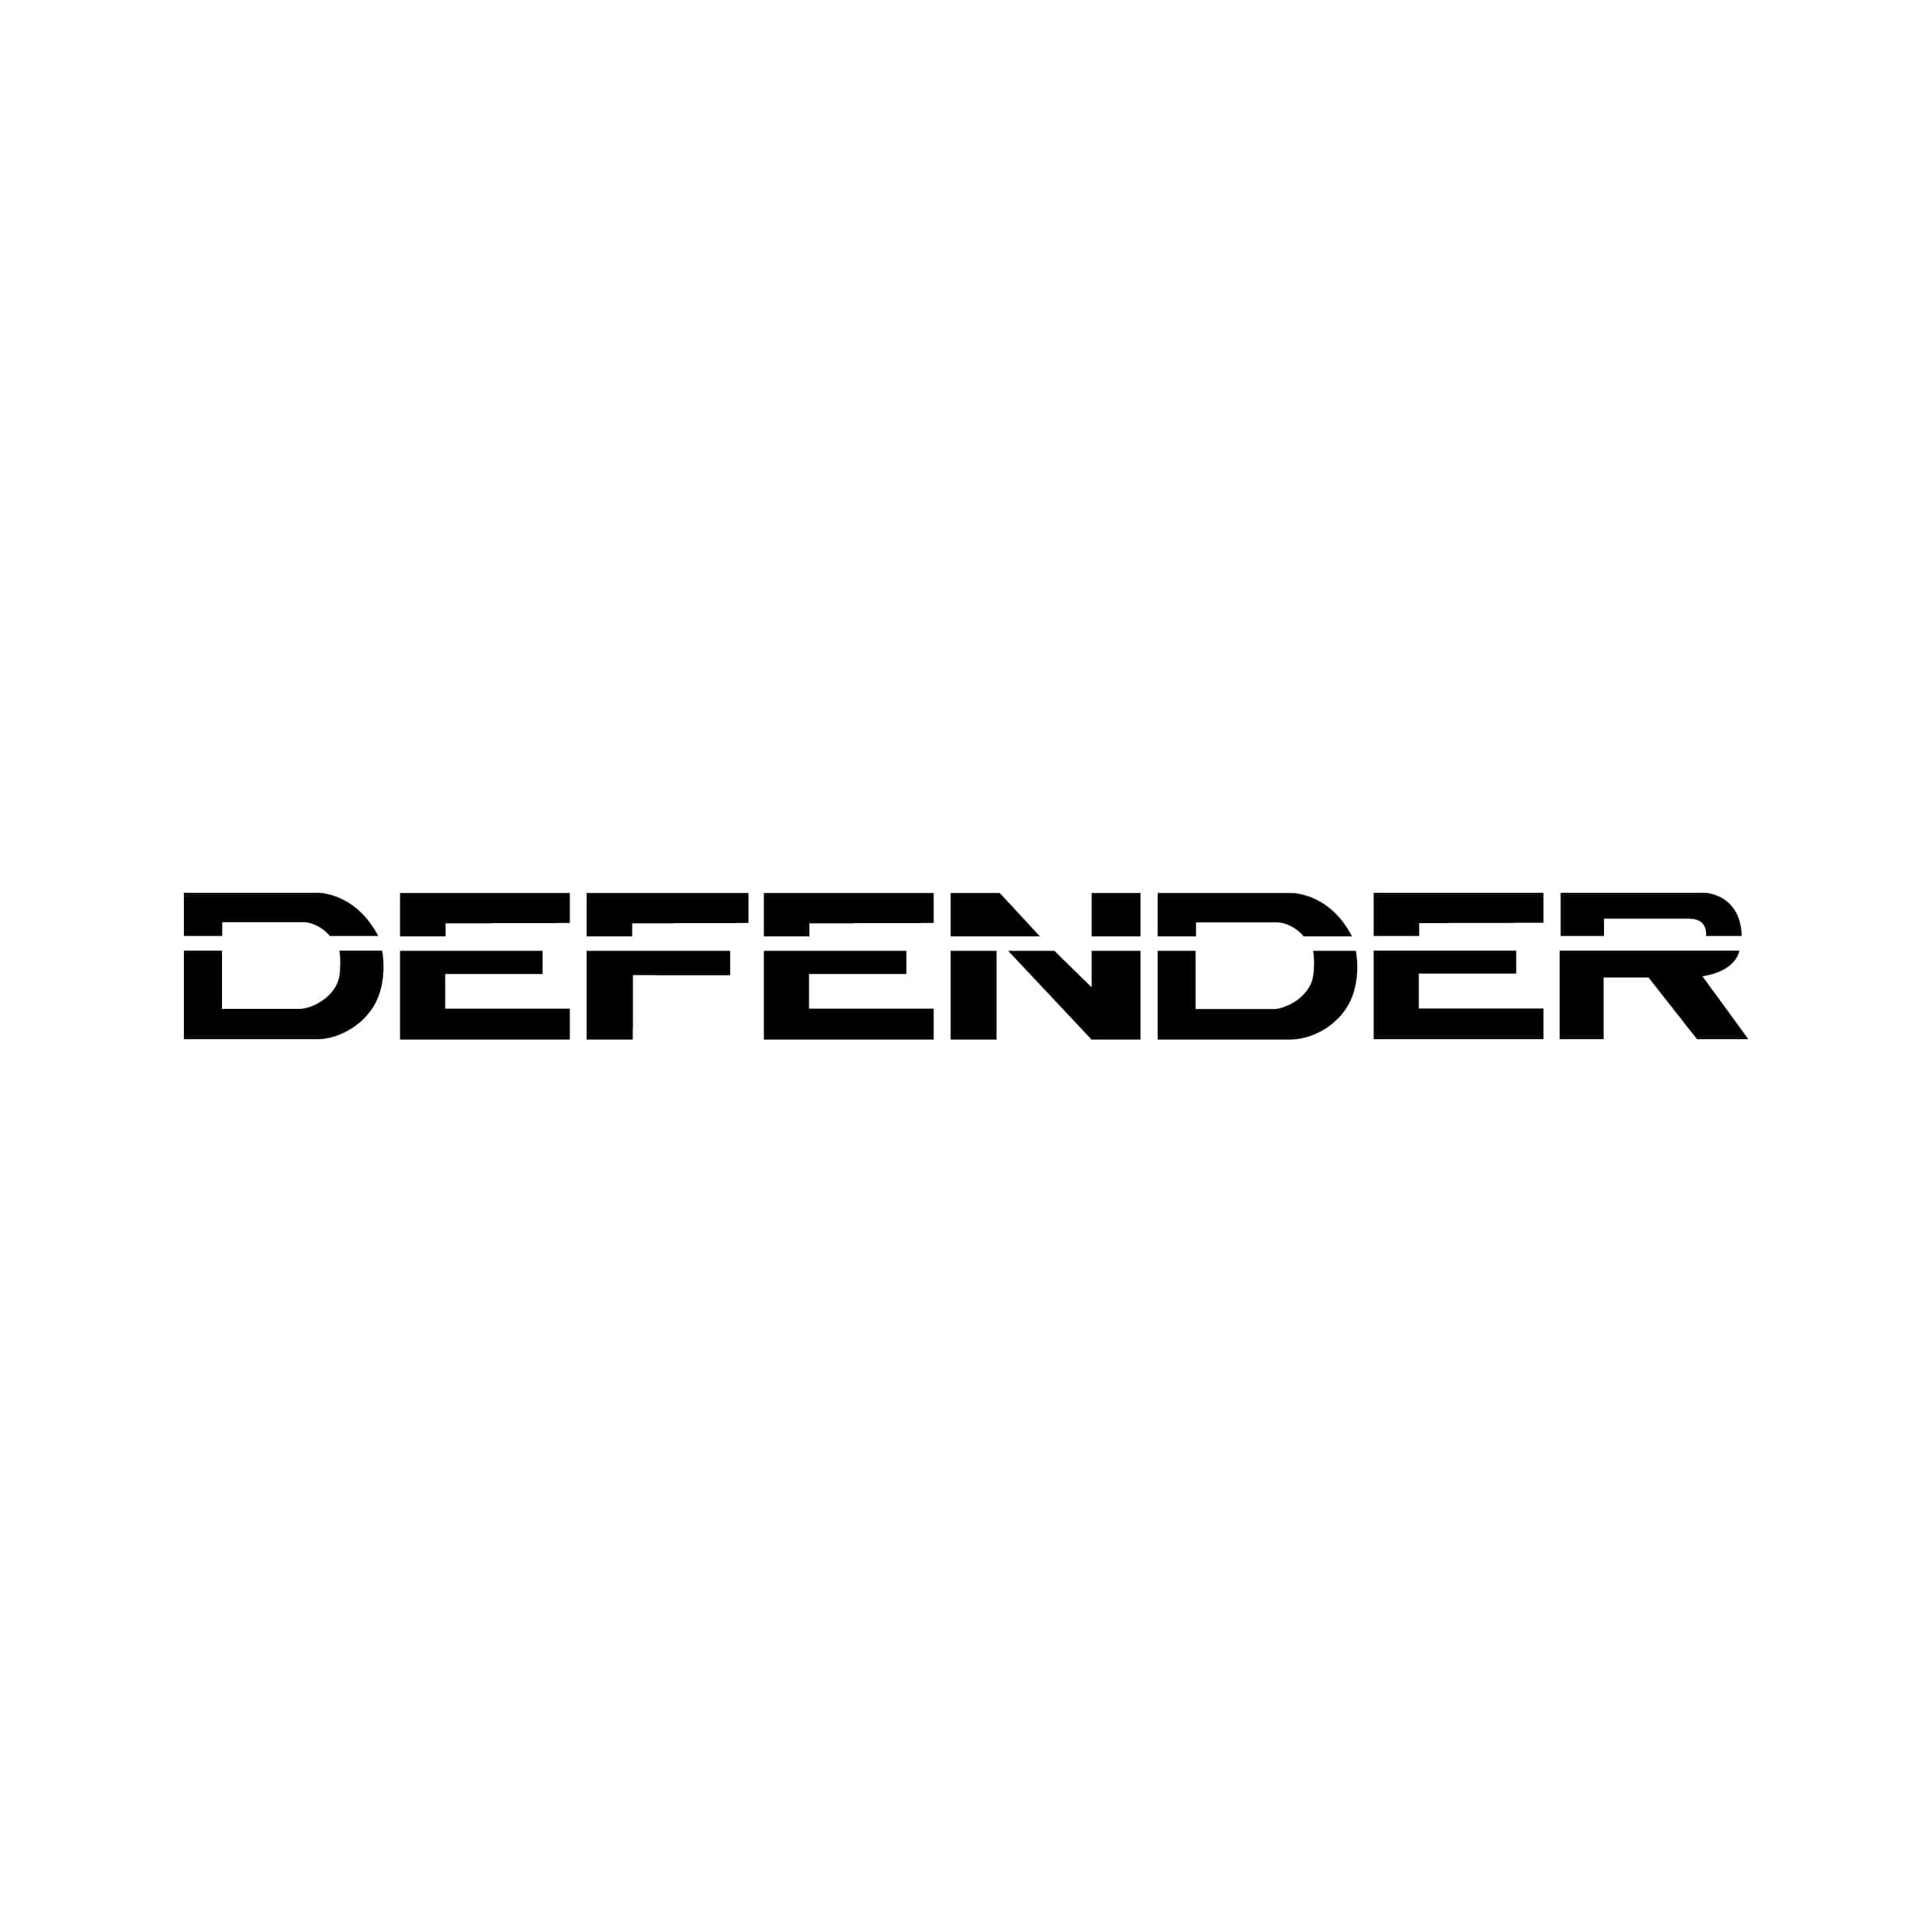 stickers-defender-land-rover-ref20-autocollant-4x4-sticker-suv-off-road-autocollants-decals-sponsors-tuning-rallye-voiture-logo-min